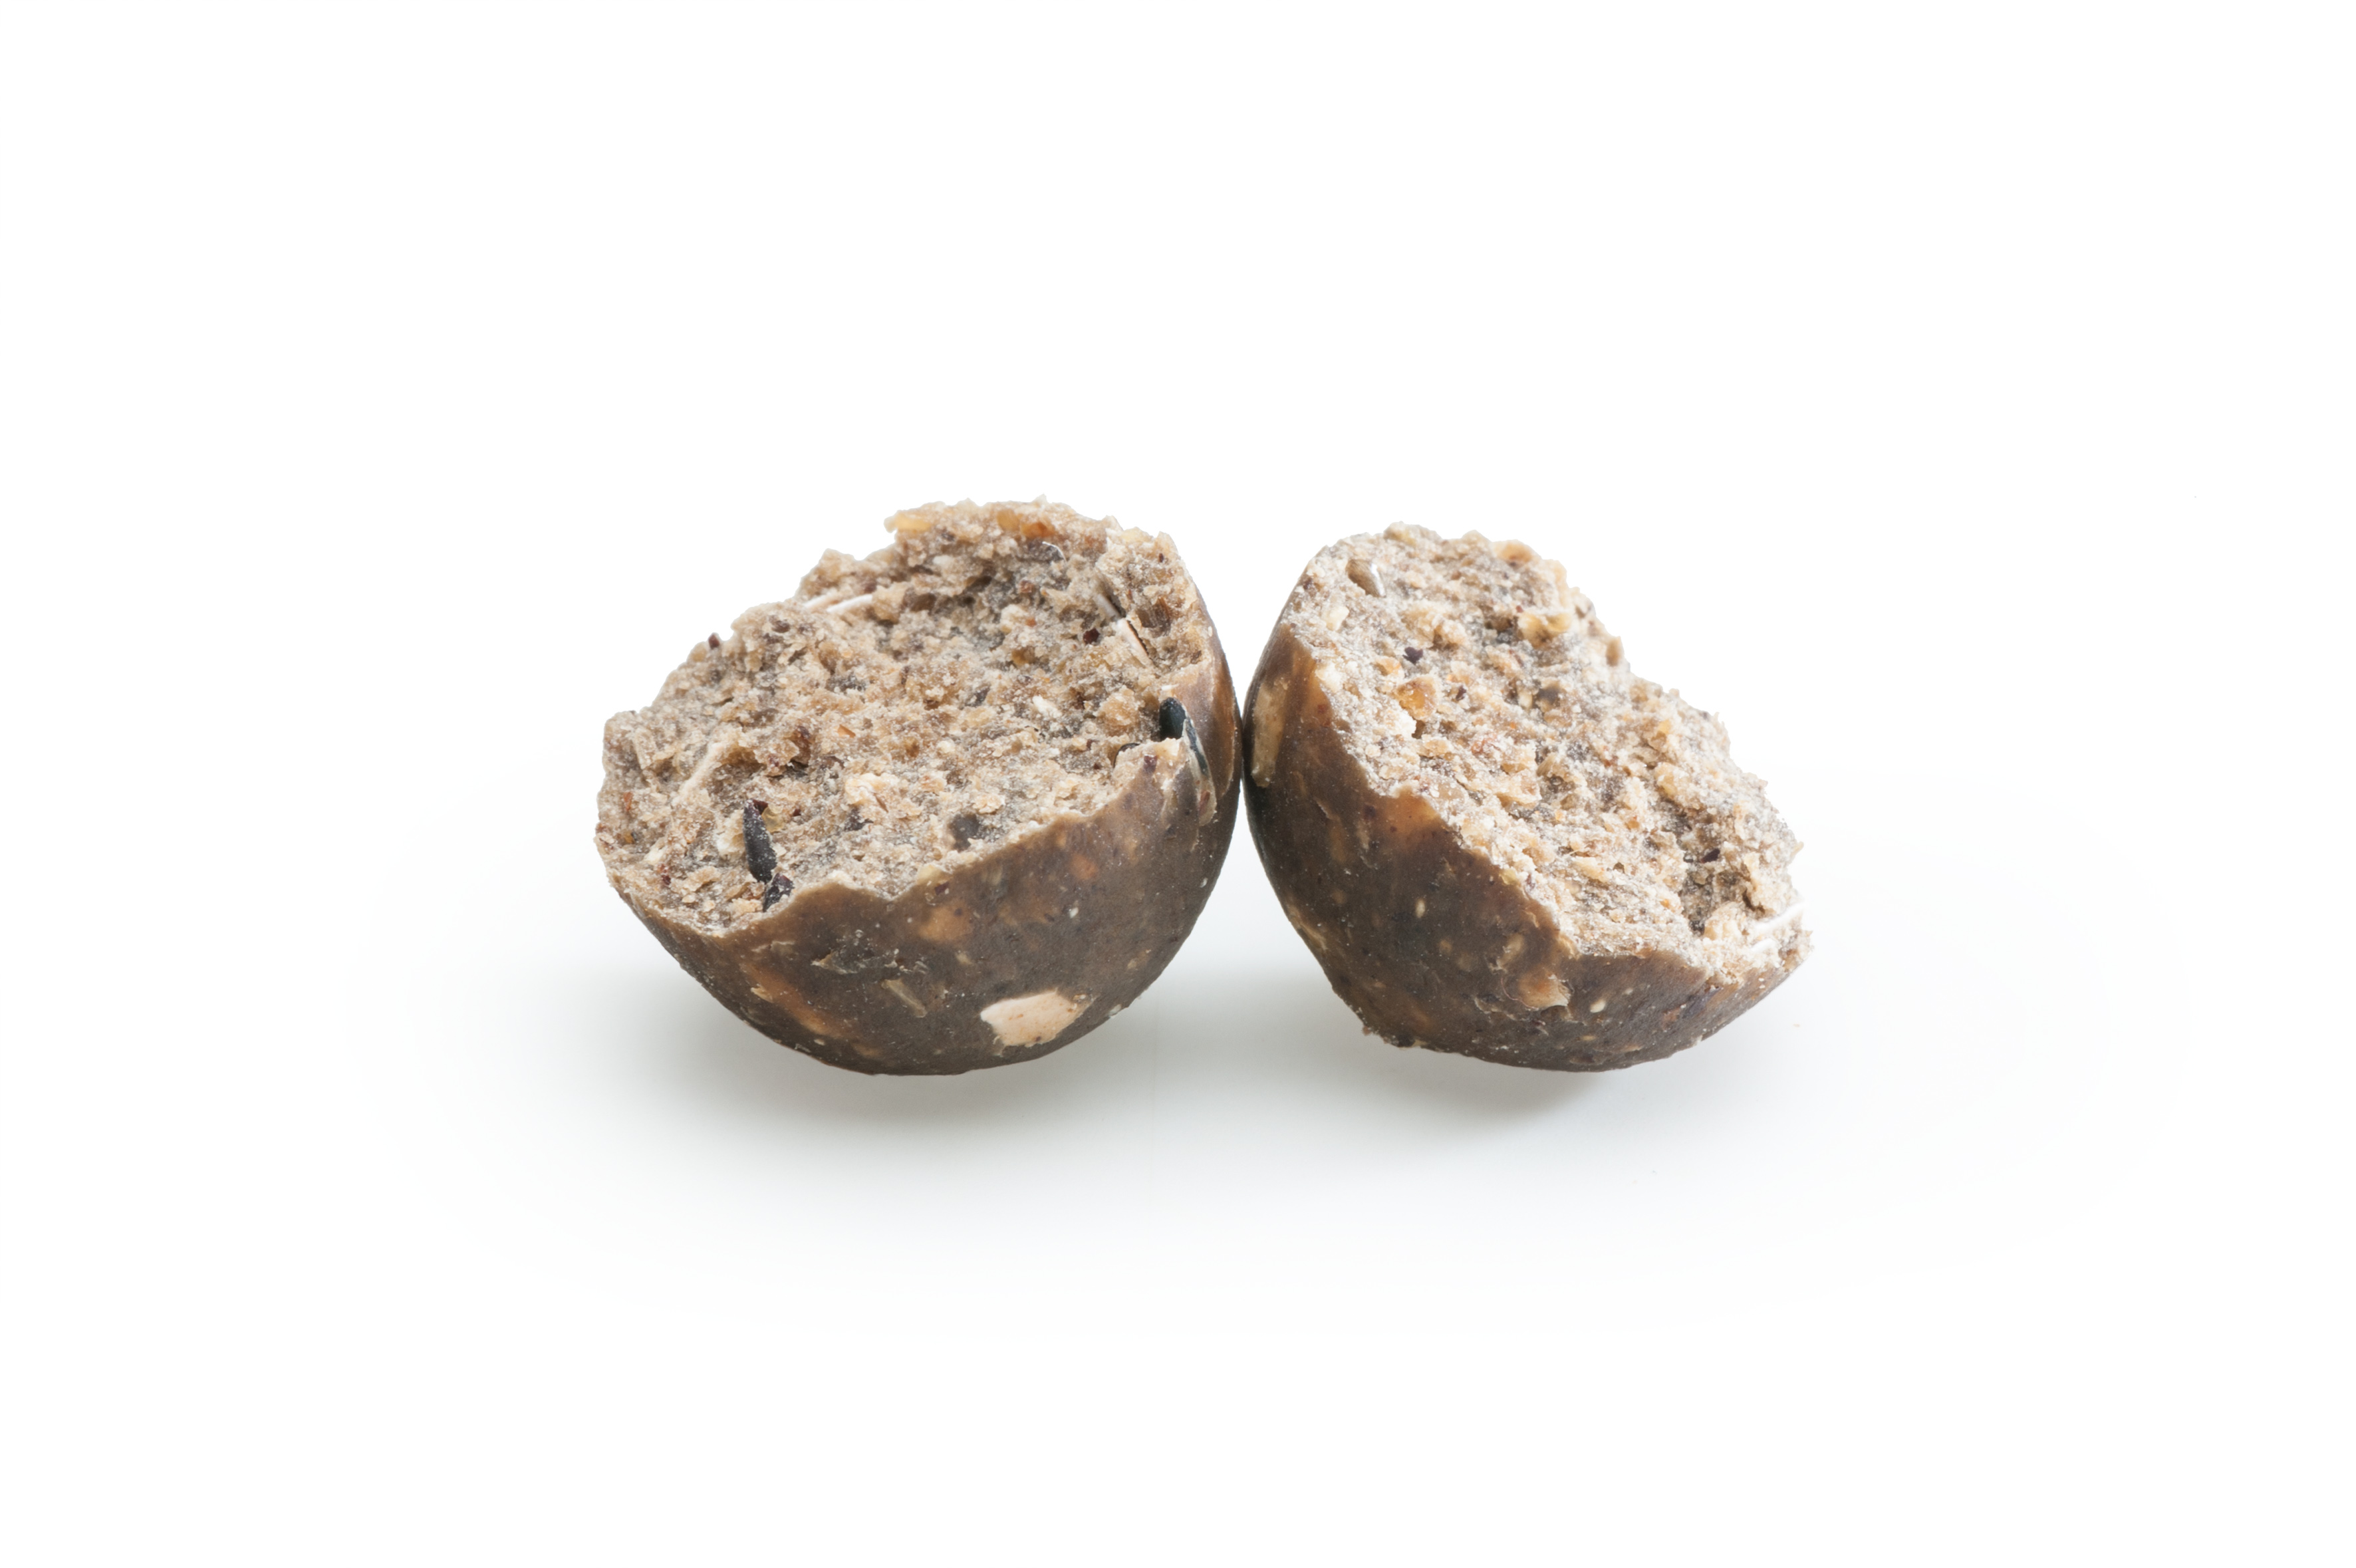 Rapid Boilies Excellent - Monster Crab (950g | 16mm)